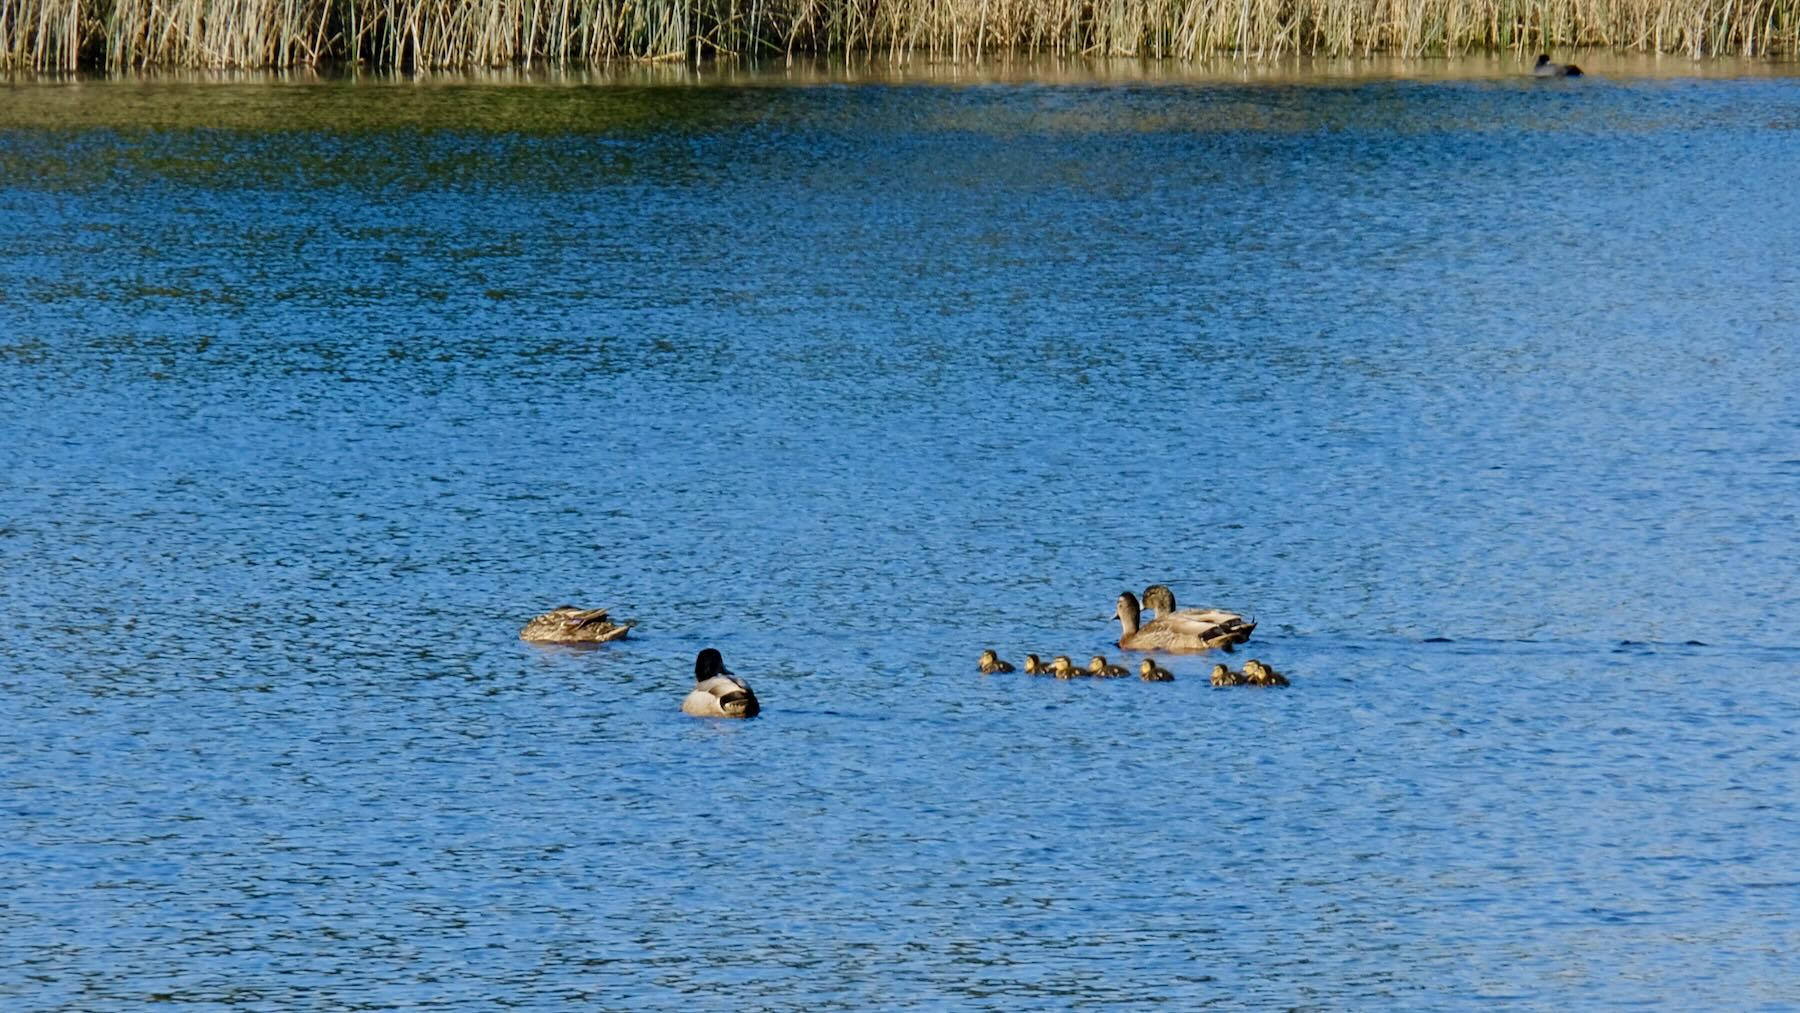 Four ducks and 7 ducklings on a lake. 